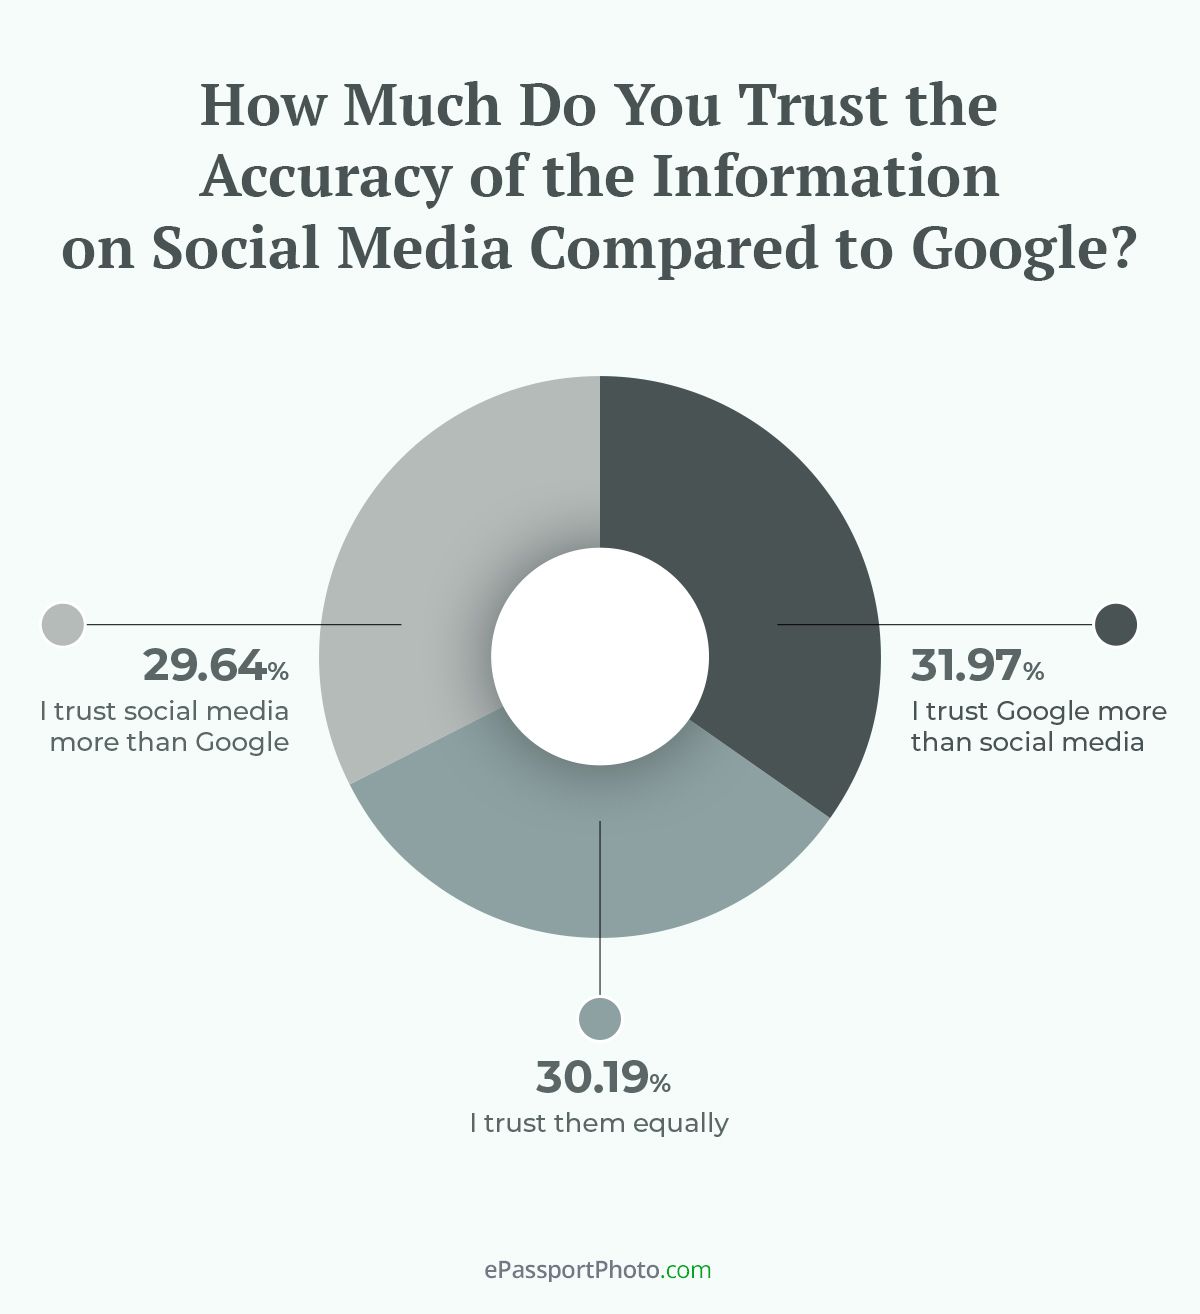 “I trust Google more than social media” was the most picked option at 32%